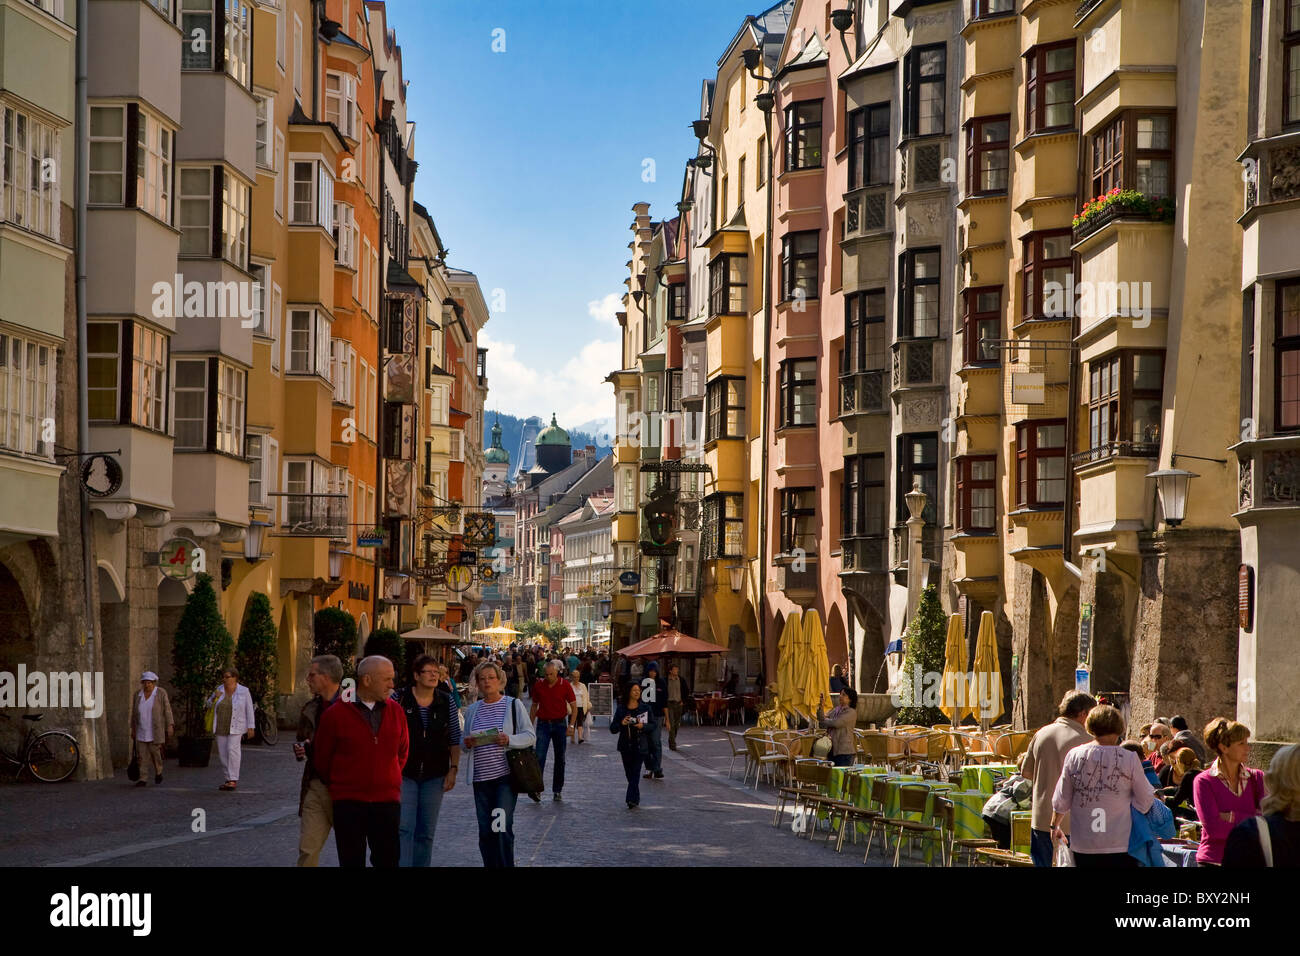 Friedrich Strasse (street) in the old section of the city of Innsbruck, Austria. Stock Photo